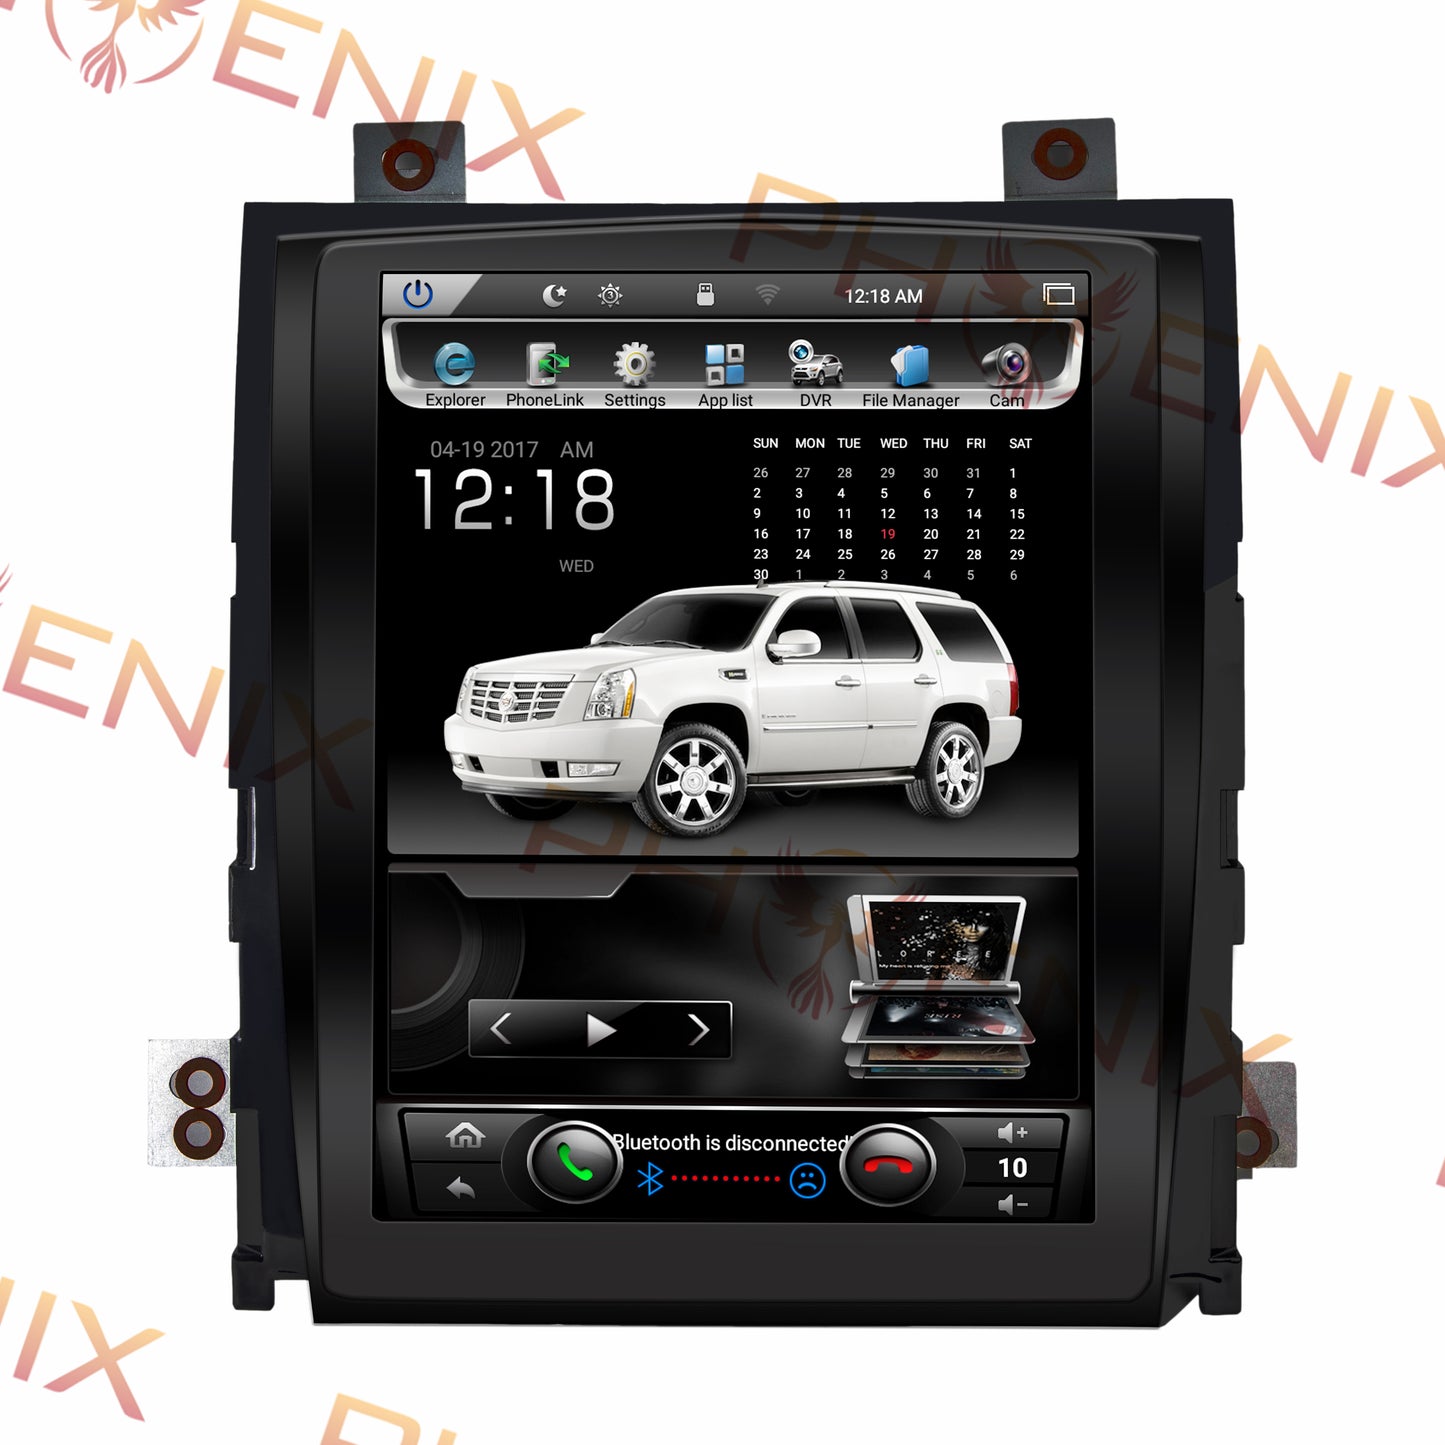 [ PX6 SIX-CORE ] 10.4" ANDROID 9 Fast Boot VERTICAL SCREEN Navigation Radio for Cadillac Escalade 2007 - 2014 - Smart Car Stereo Radio Navigation | In-Dash audio/video players online - Phoeni